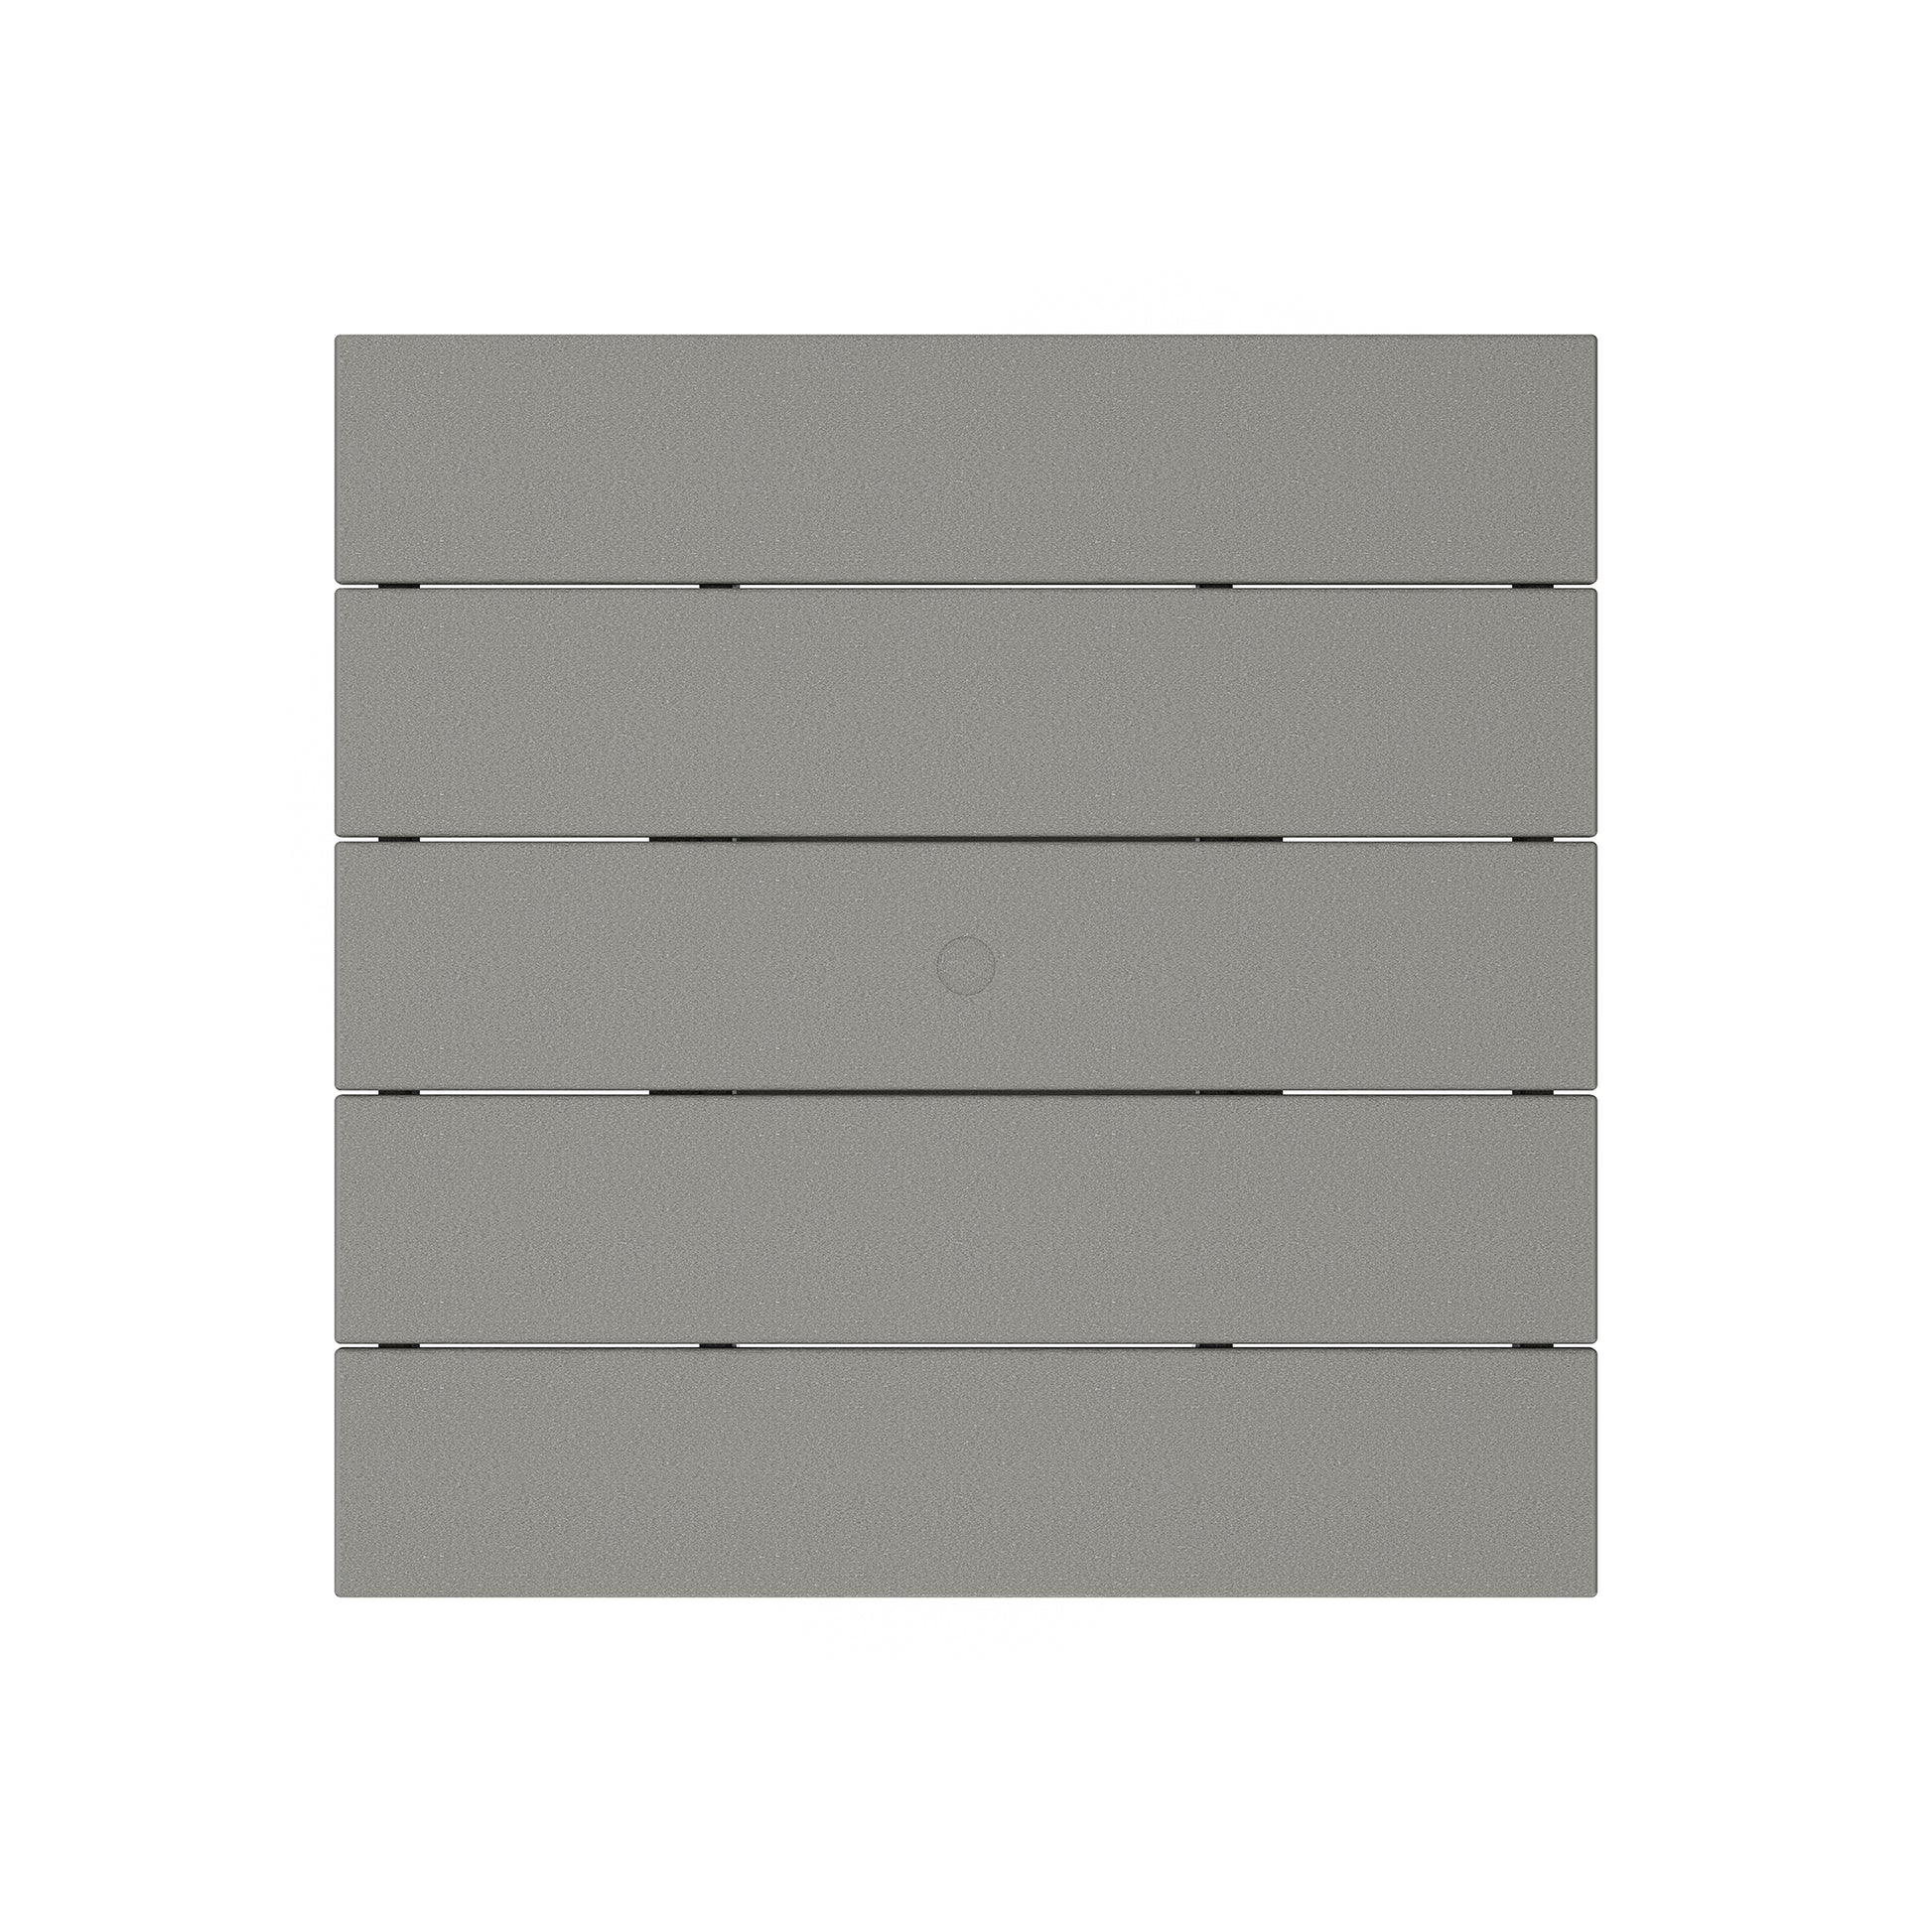 A minimalistic gray square wall panel with six horizontal slats and a circular relief in the center, crafted from POLYWOOD lumber. The panel features a smooth texture and a modern design.